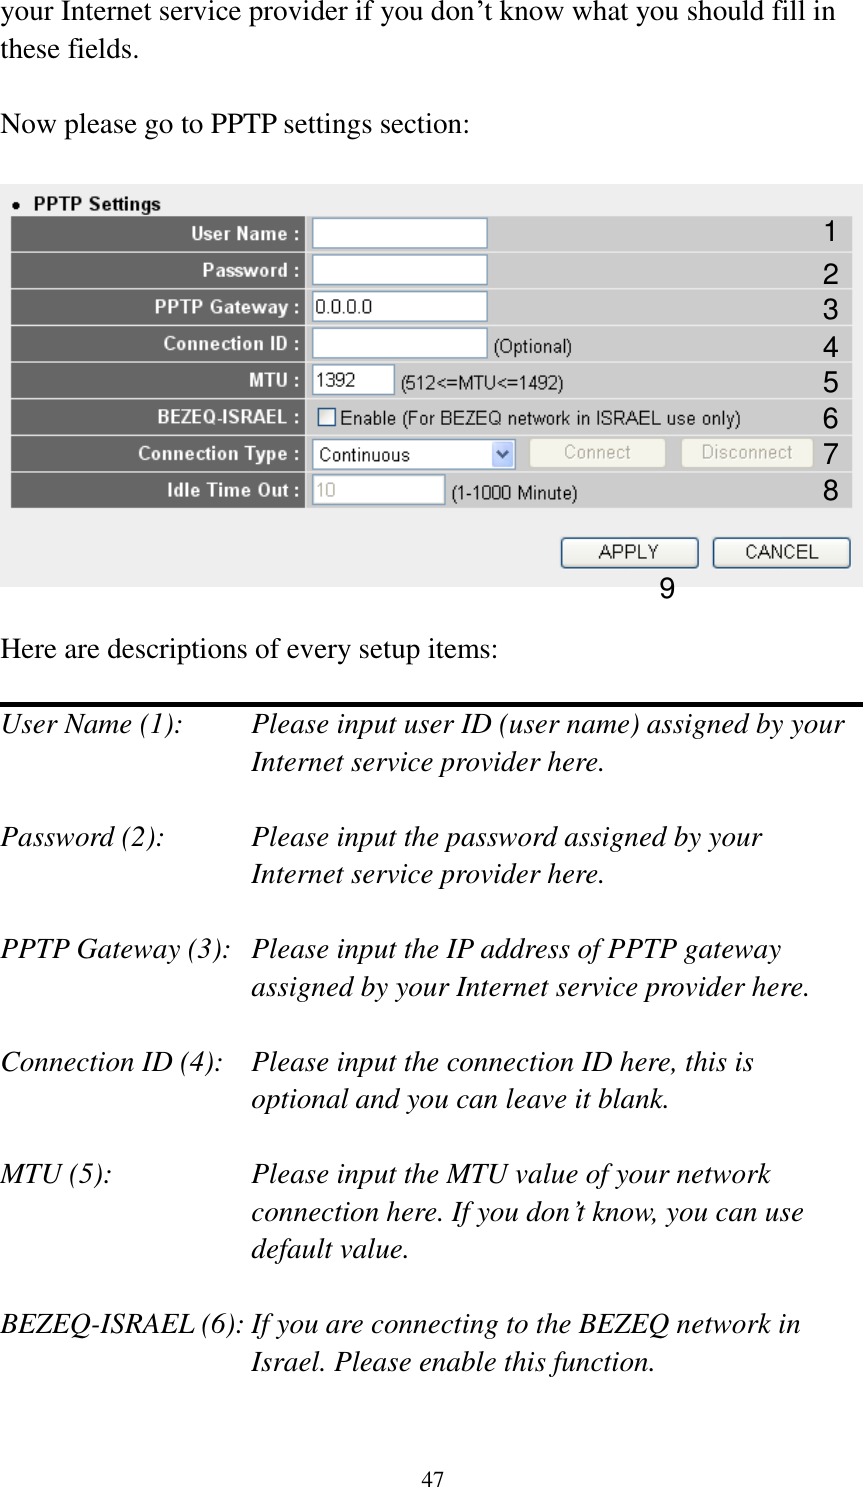 47 your Internet service provider if you don‟t know what you should fill in these fields.  Now please go to PPTP settings section:    Here are descriptions of every setup items:  User Name (1):    Please input user ID (user name) assigned by your Internet service provider here.  Password (2):    Please input the password assigned by your Internet service provider here.  PPTP Gateway (3):   Please input the IP address of PPTP gateway assigned by your Internet service provider here.  Connection ID (4):    Please input the connection ID here, this is optional and you can leave it blank.  MTU (5):    Please input the MTU value of your network connection here. If you don‟t know, you can use default value.  BEZEQ-ISRAEL (6): If you are connecting to the BEZEQ network in Israel. Please enable this function.  1 2 3 4 5 7 8 9 6 